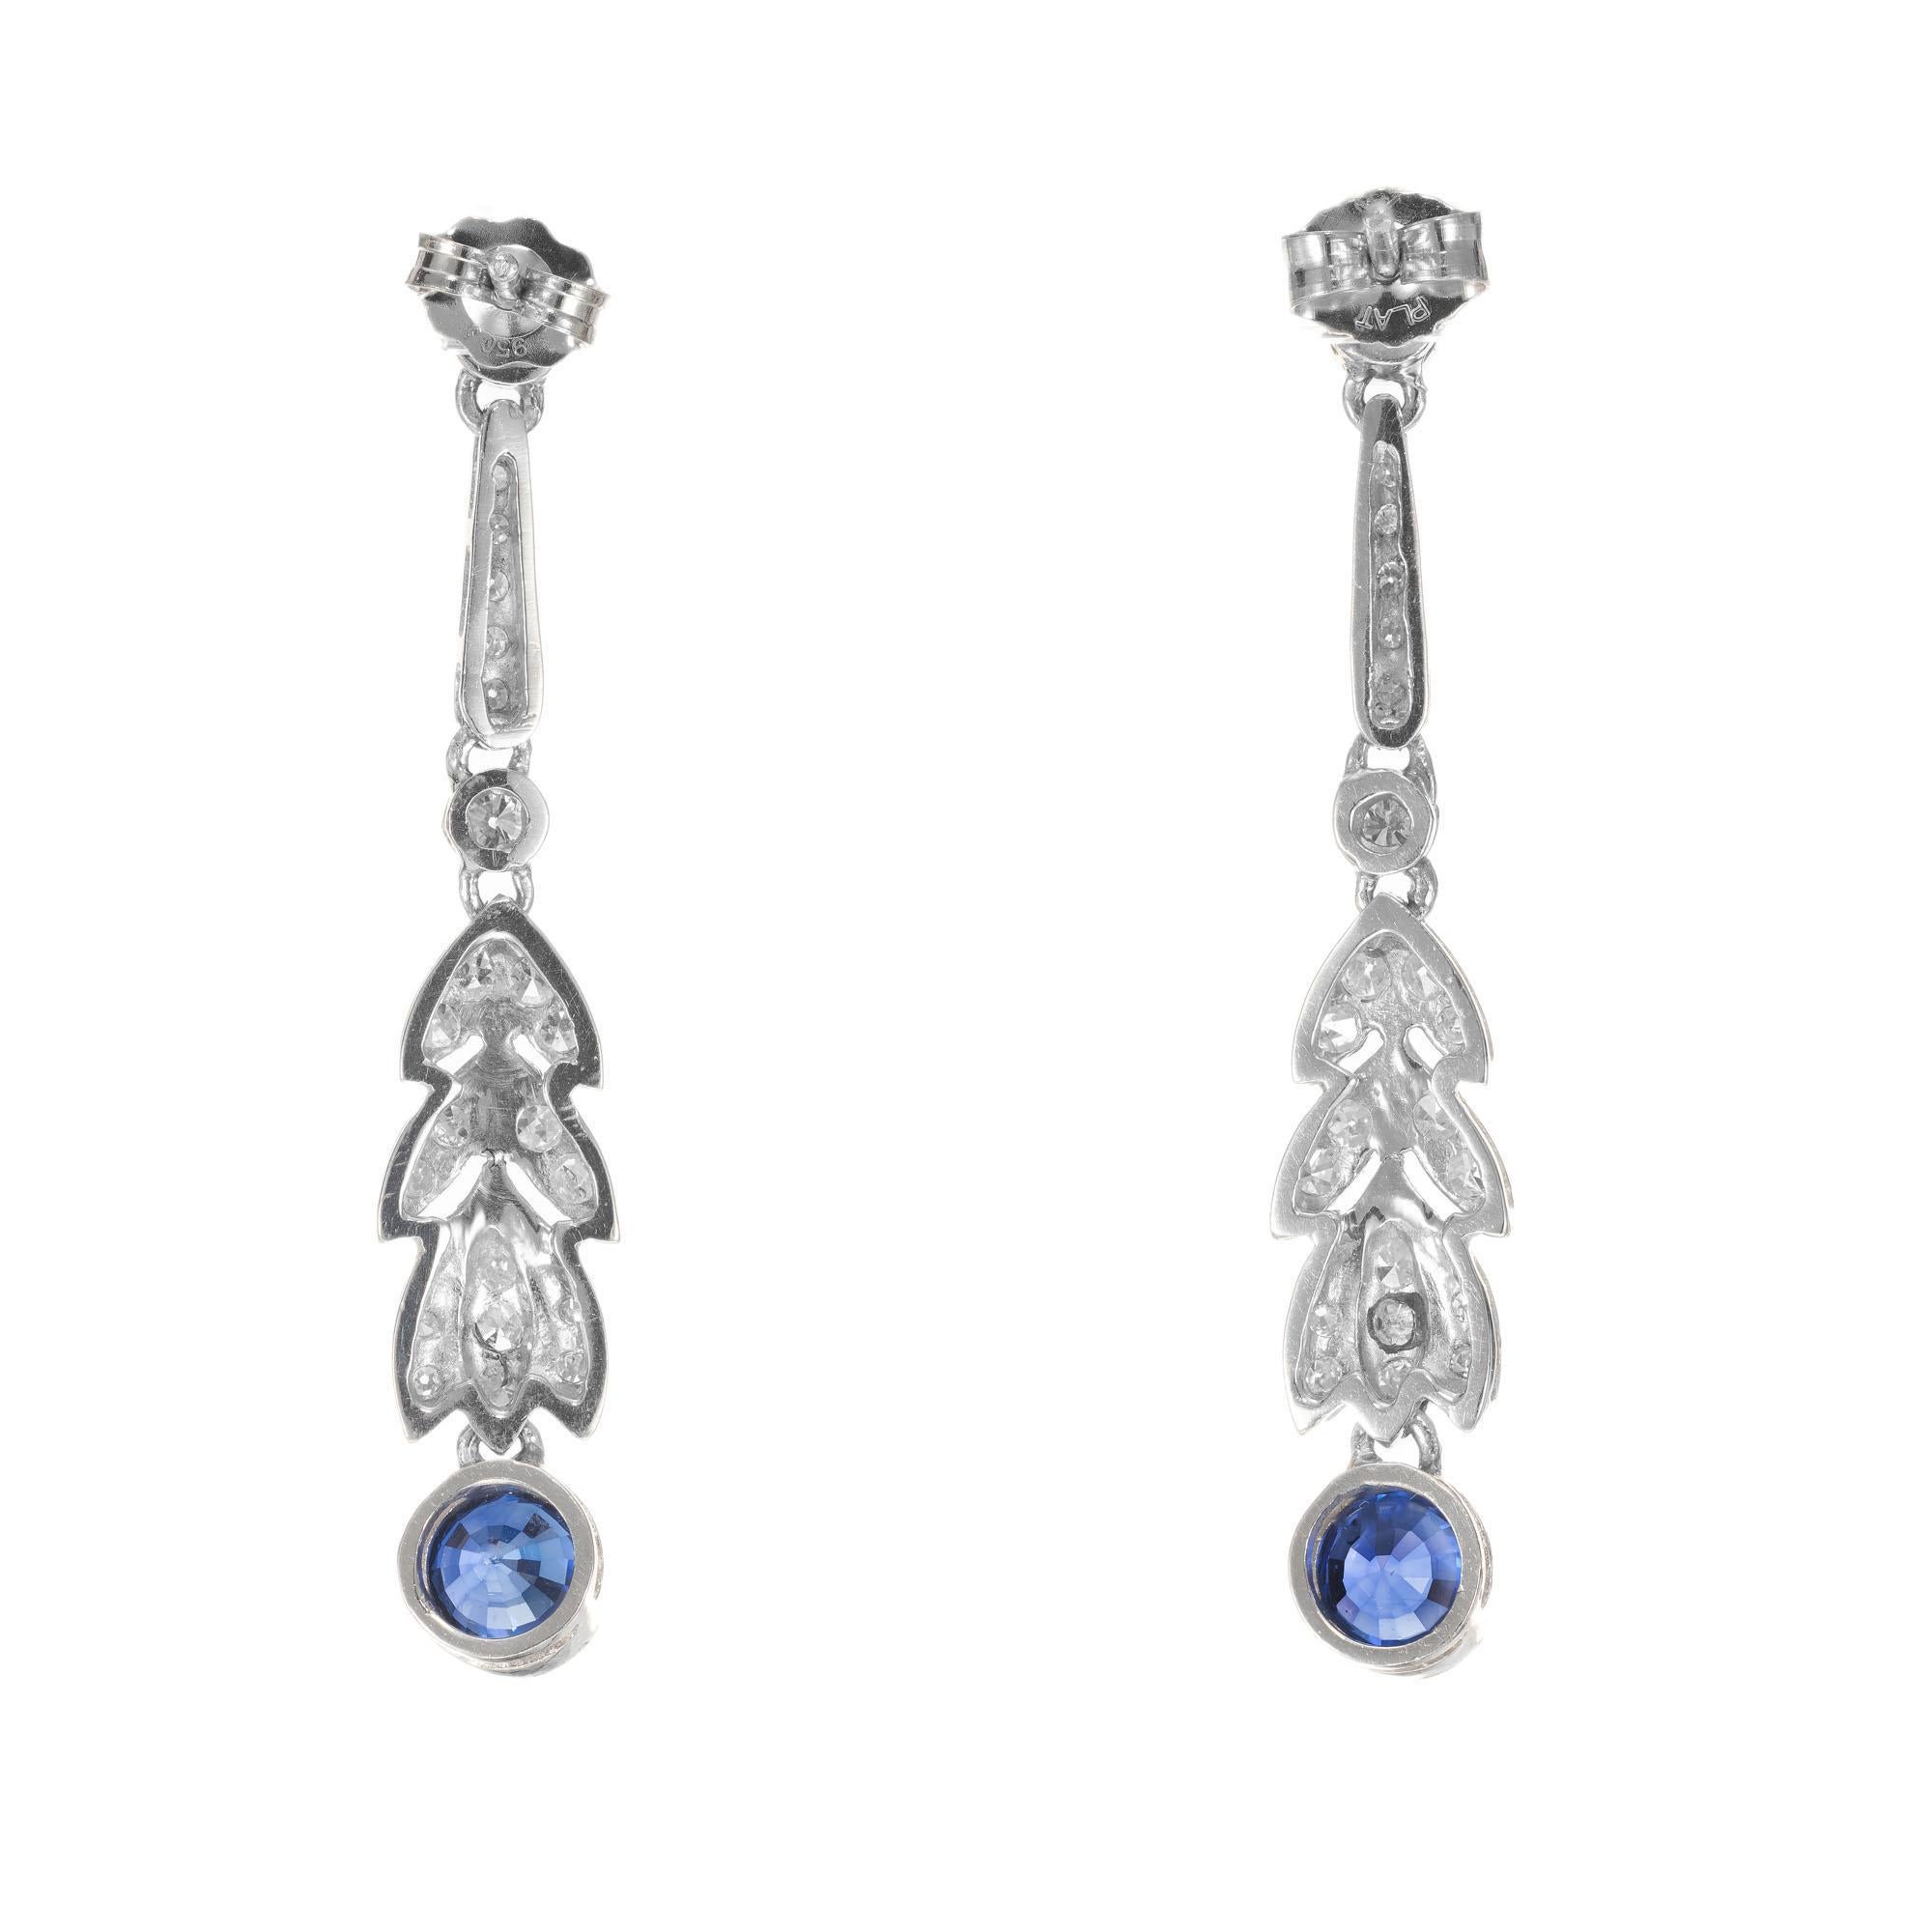 Art Deco 1920's sapphire and diamond earrings. 4 round brilliant cut diamonds with 40 singe cut accent diamonds. 2 round royal blue simple heat only sapphire dangles. Set in platinum.

2 round royal blue sapphires, VS-SI approx. .90cts
4 round